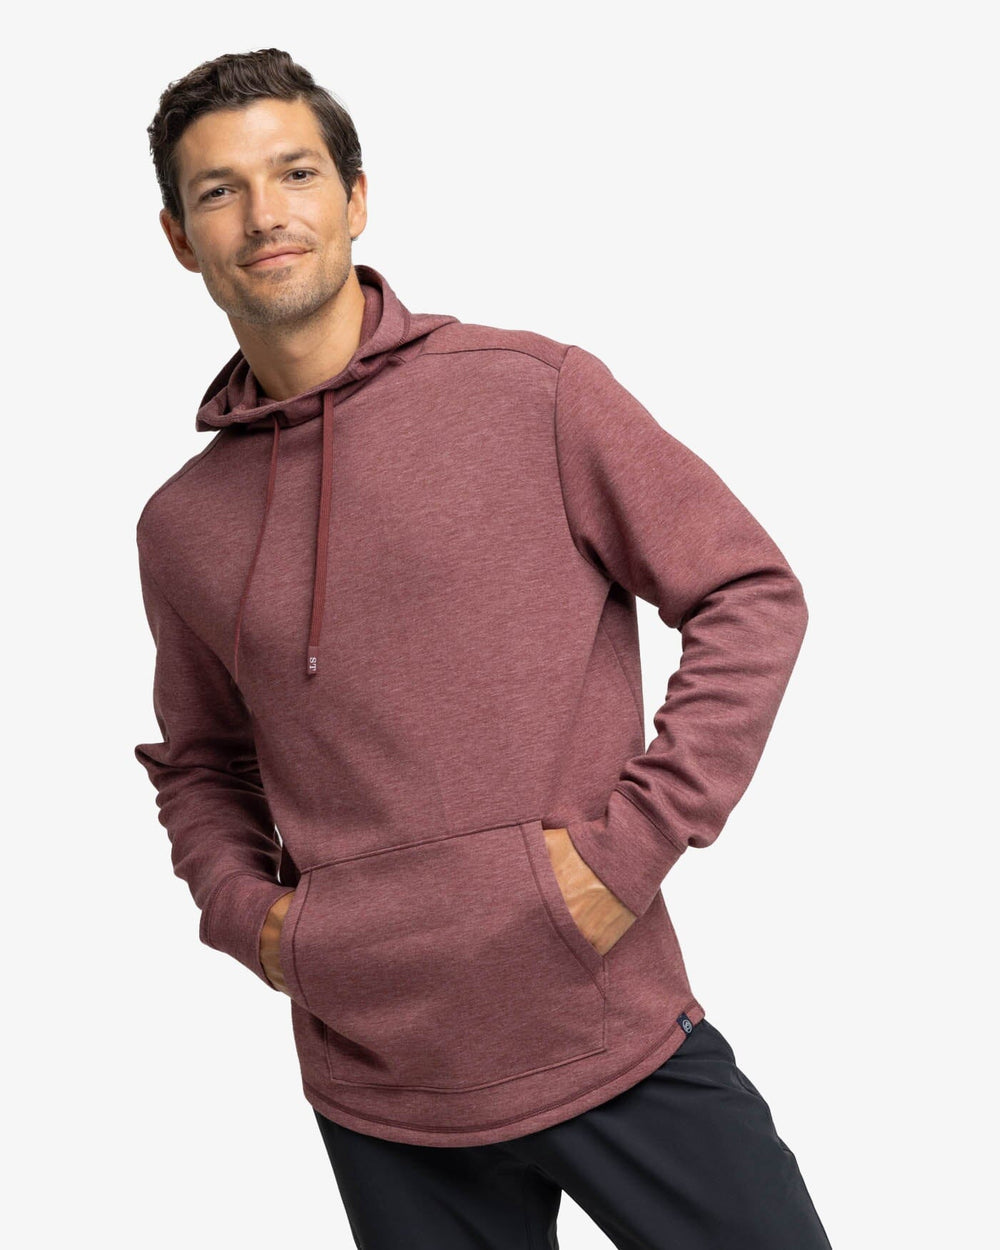 The front view of the Southern Tide Stratford Heather Interlock Hoodie by Southern Tide - Heather Bordeaux Red